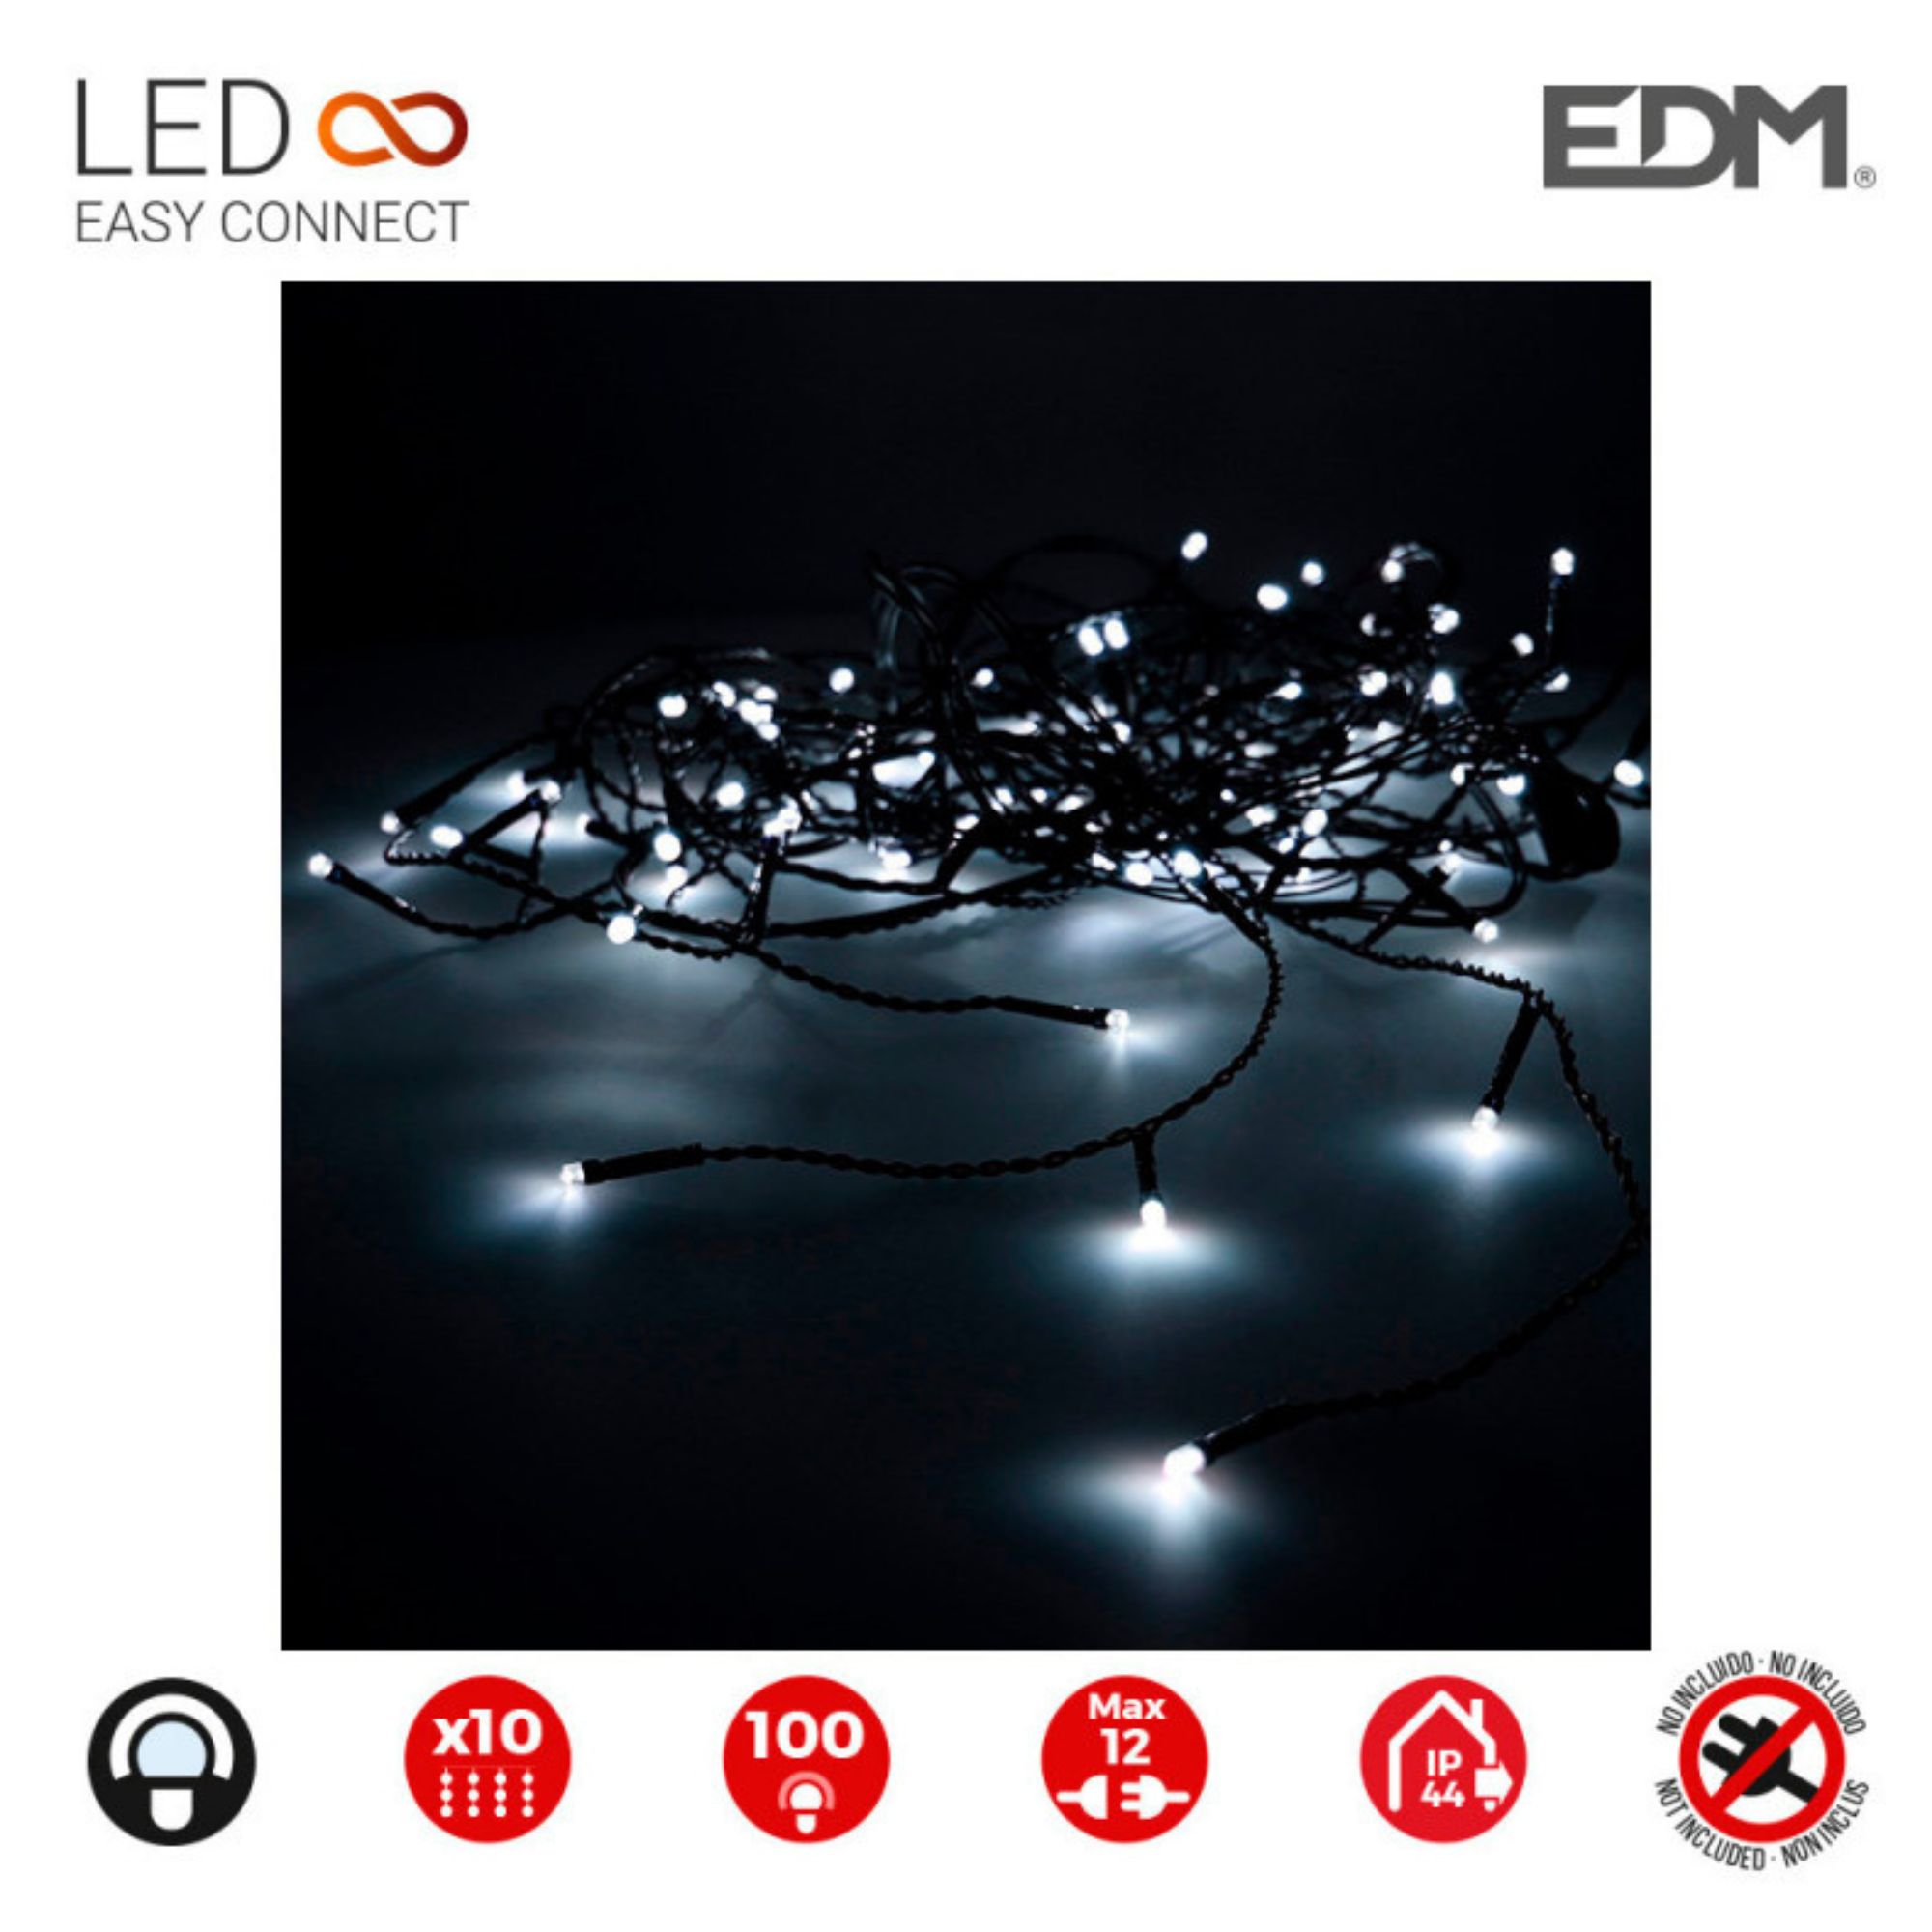 CORTINA EASY-CONNECT BR. FRIO 10 T. 100 LED